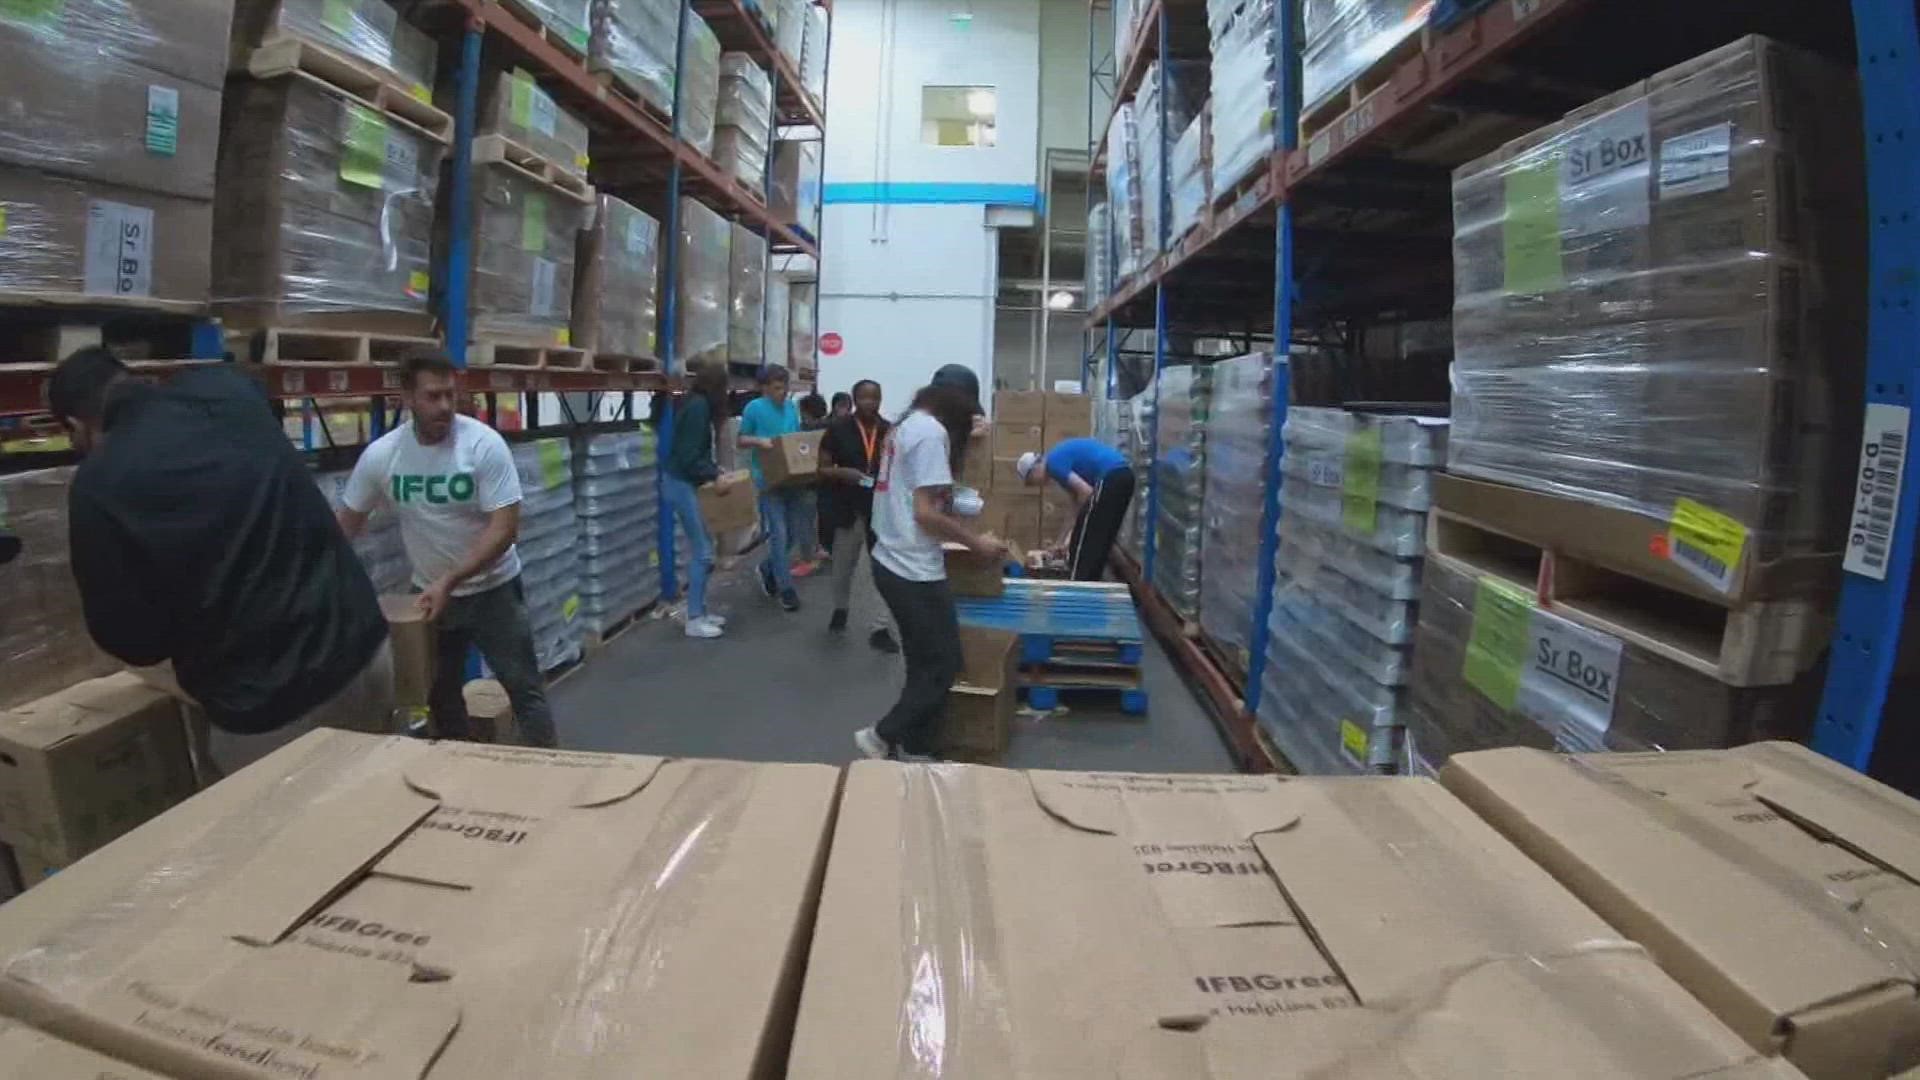 The non-profit said it’s struggling to keep up with demand given the ongoing supply chain crisis and inflation.